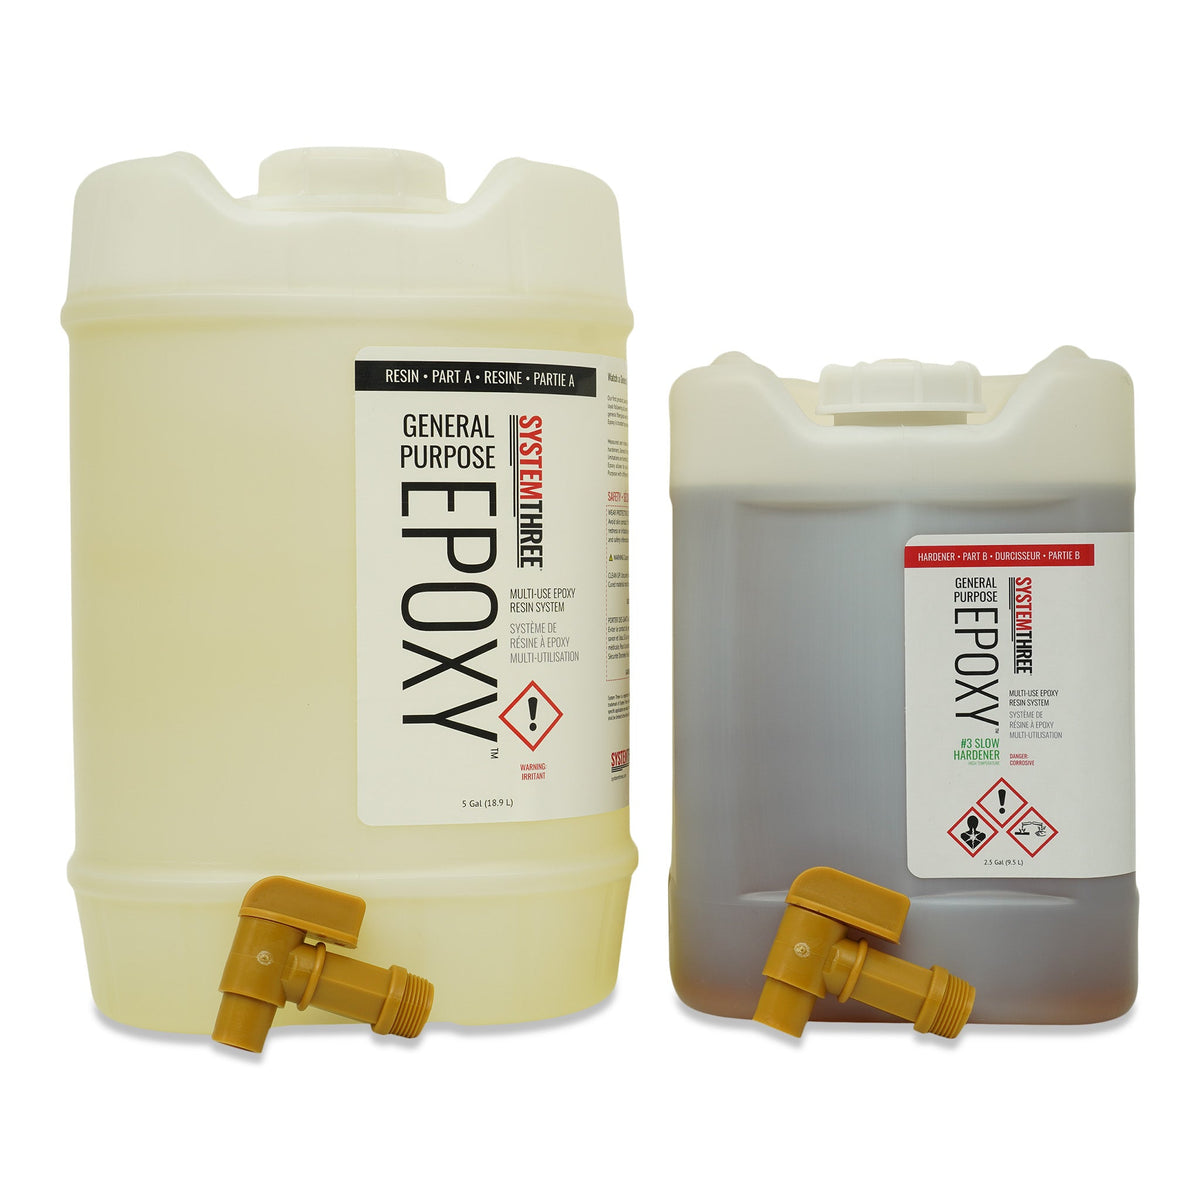 THIN- 3:1 Two Part Thin Epoxy Resin System – Kit Size 1.33 Gallons -  Composite Envisions